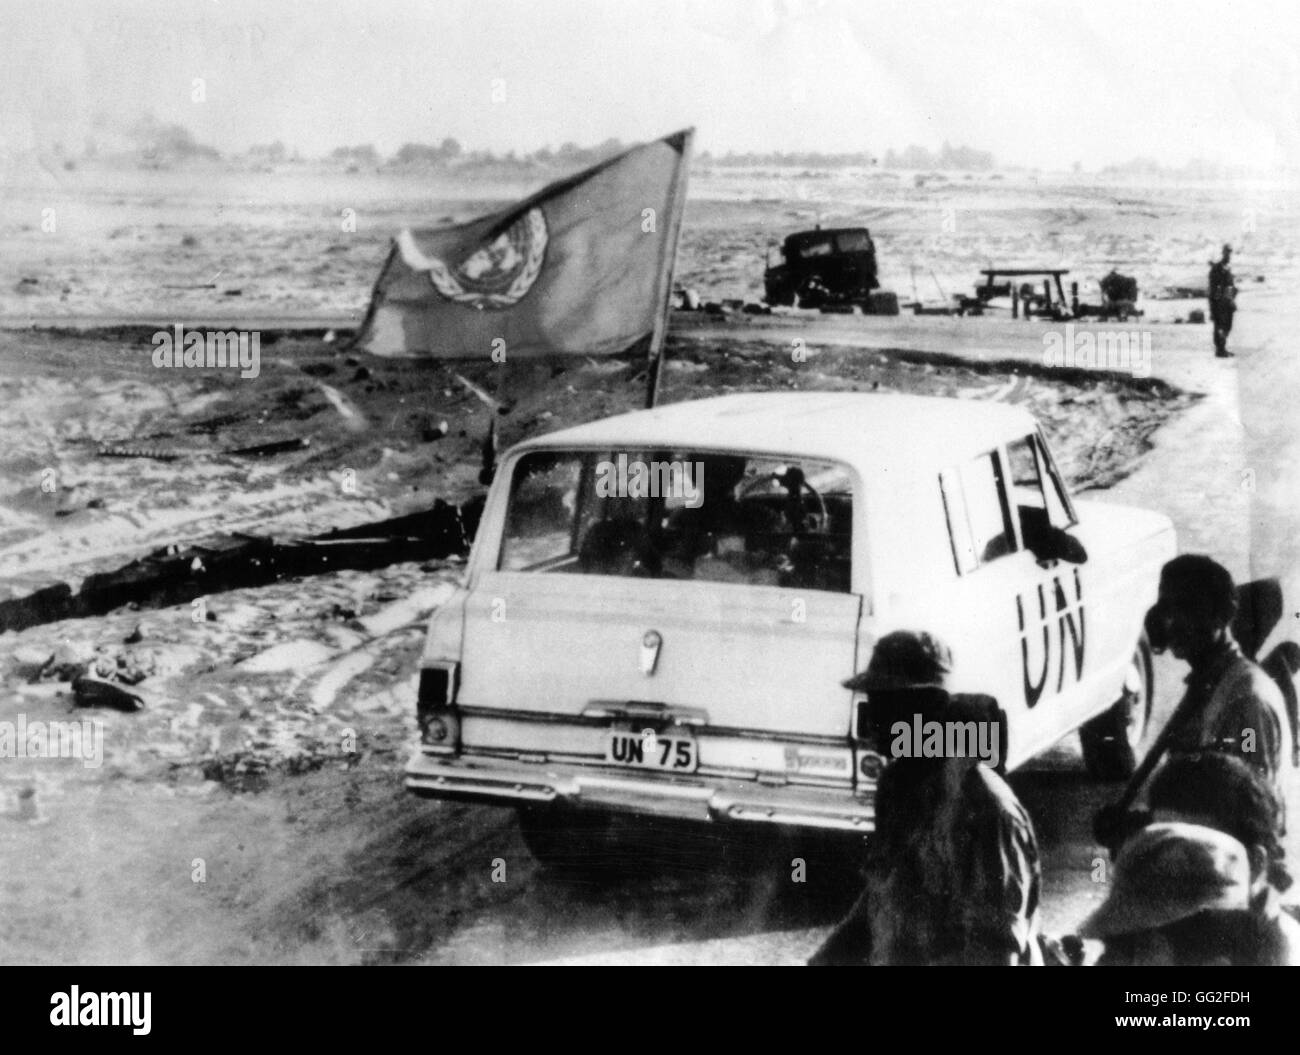 A United Nations vehicle passing Israeli troops nearQuantara on the east bank of the Suez Canal.  A U.N. observer was posted on either side of the canal to supervise the cease-fire between Israel and the United Arab Republic 1956 Egypt - Suez Canal crisis Stock Photo